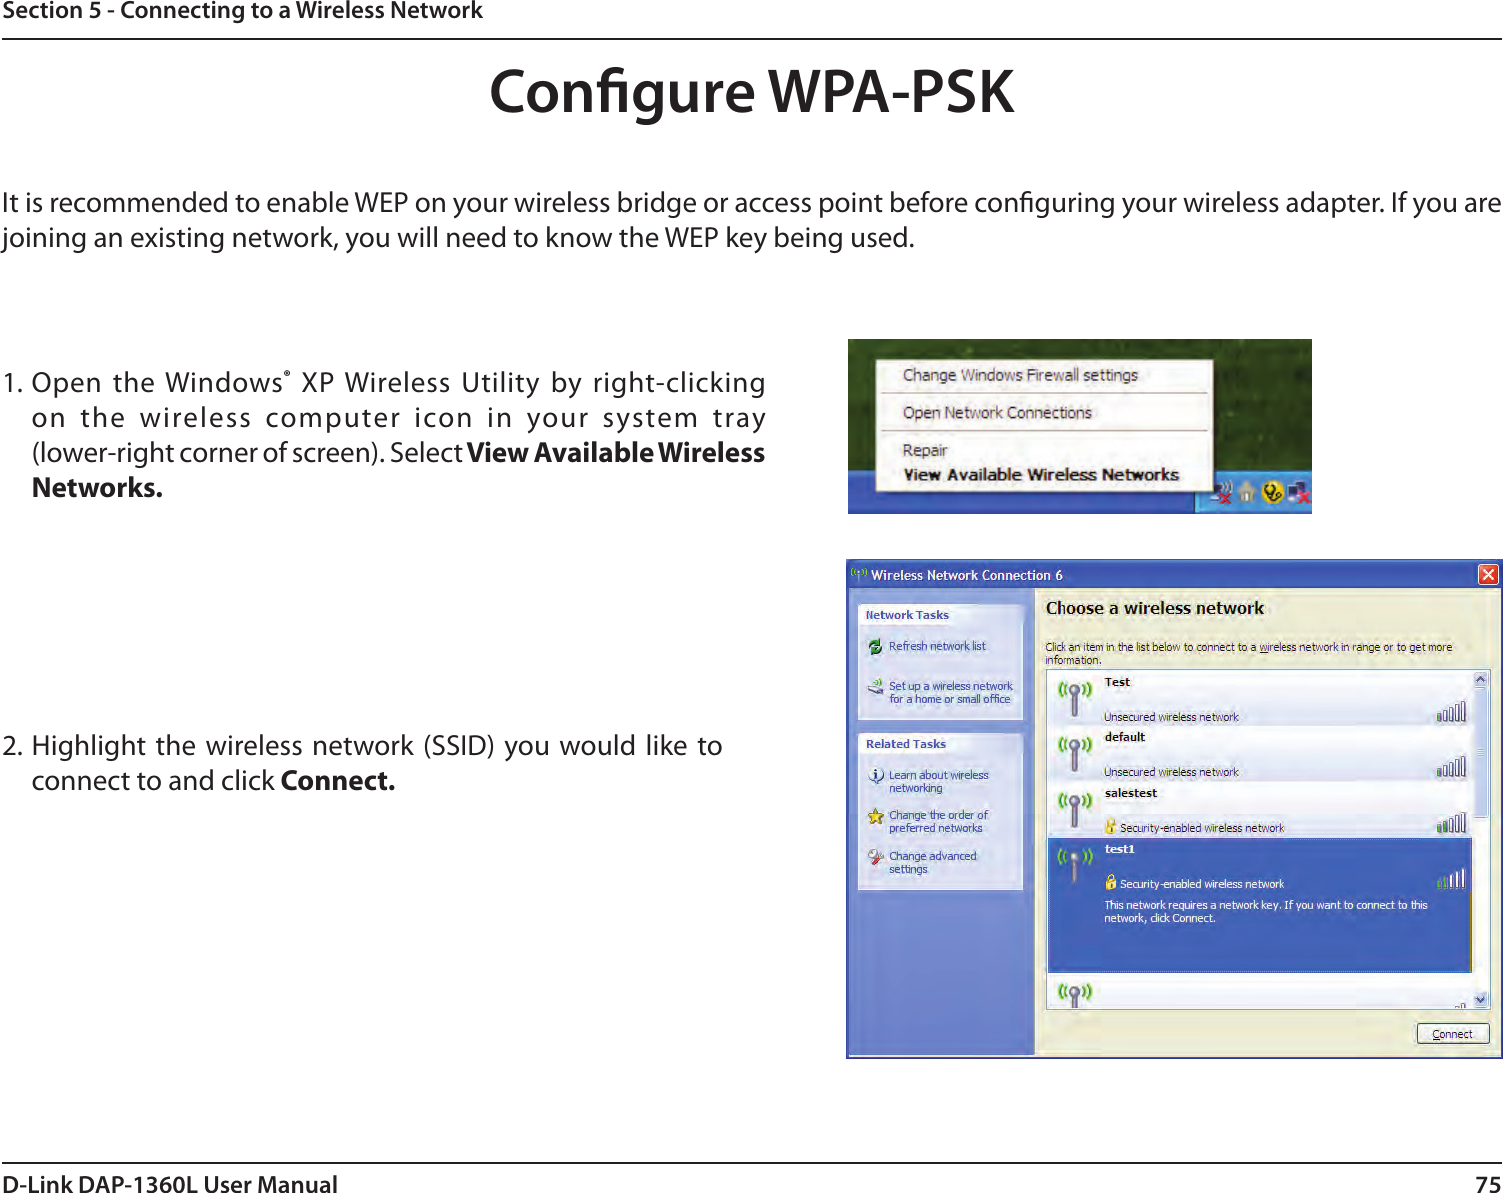 75D-Link DAP-1360L User ManualSection 5 - Connecting to a Wireless NetworkCongure WPA-PSKIt is recommended to enable WEP on your wireless bridge or access point before conguring your wireless adapter. If you are joining an existing network, you will need to know the WEP key being used.2. Highlight the wireless network (SSID) you would like to connect to and click Connect.1. Open  the Windows®  XP Wireless  Utility  by  right-clicking on  the  wireless  computer  icon  in  your  system  tray  (lower-right corner of screen). Select View Available Wireless Networks. 